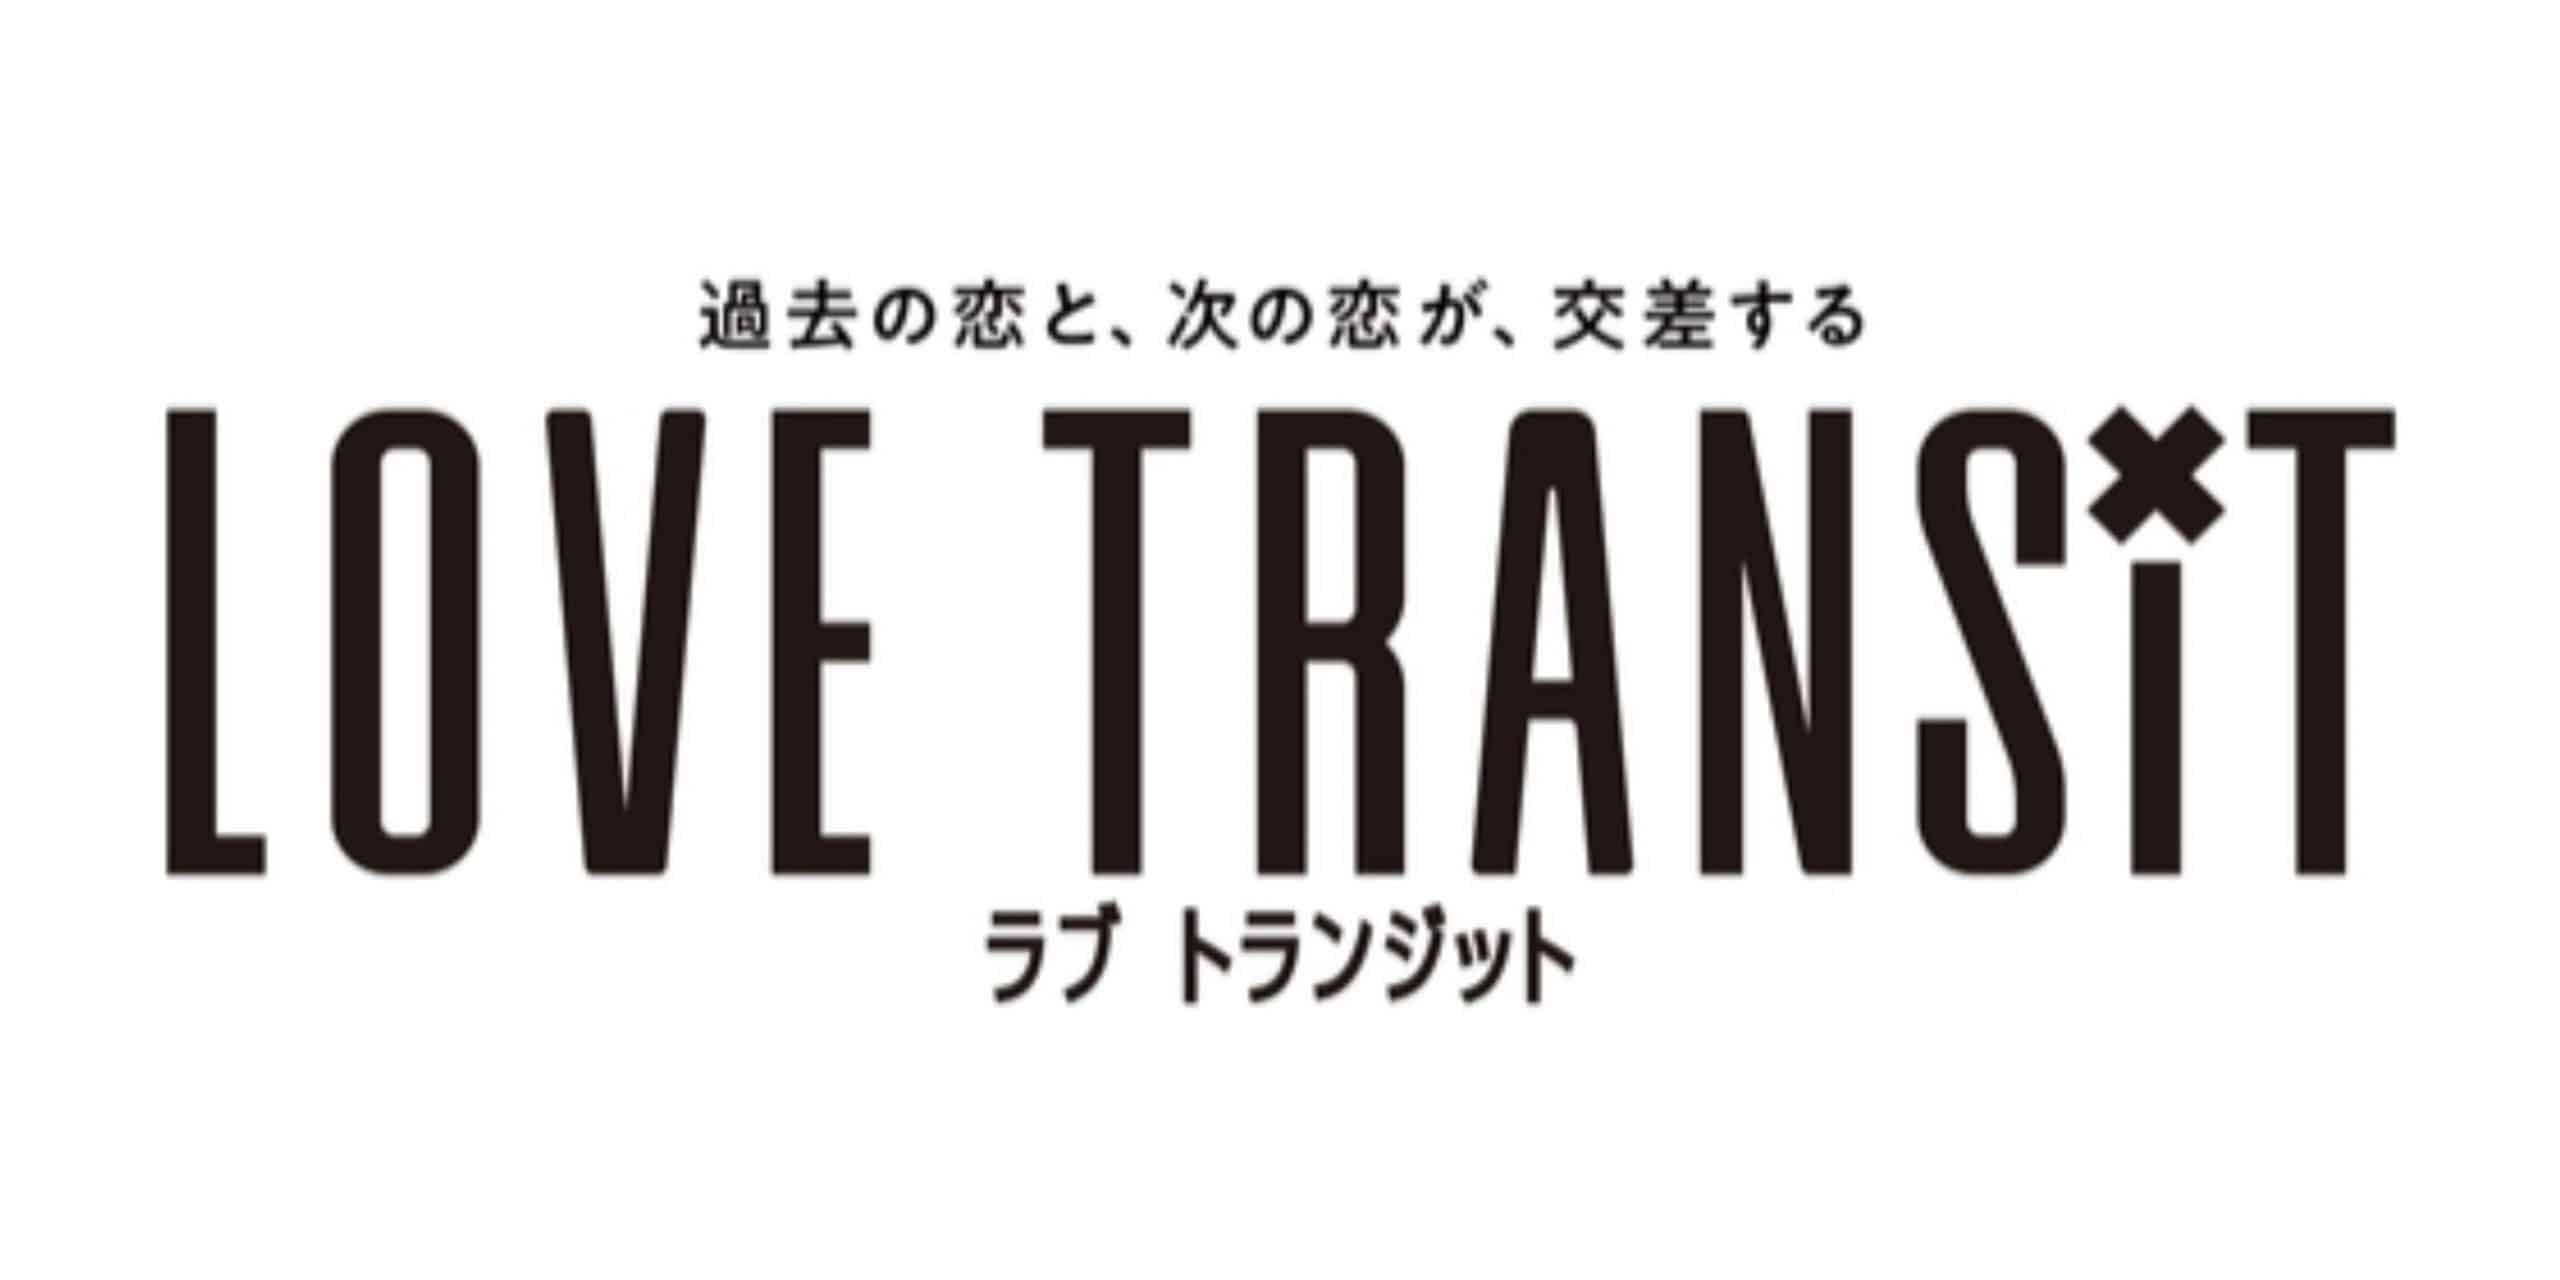 Japanese Dating Show How To Watch Love Transit Episodes? Synopsis 